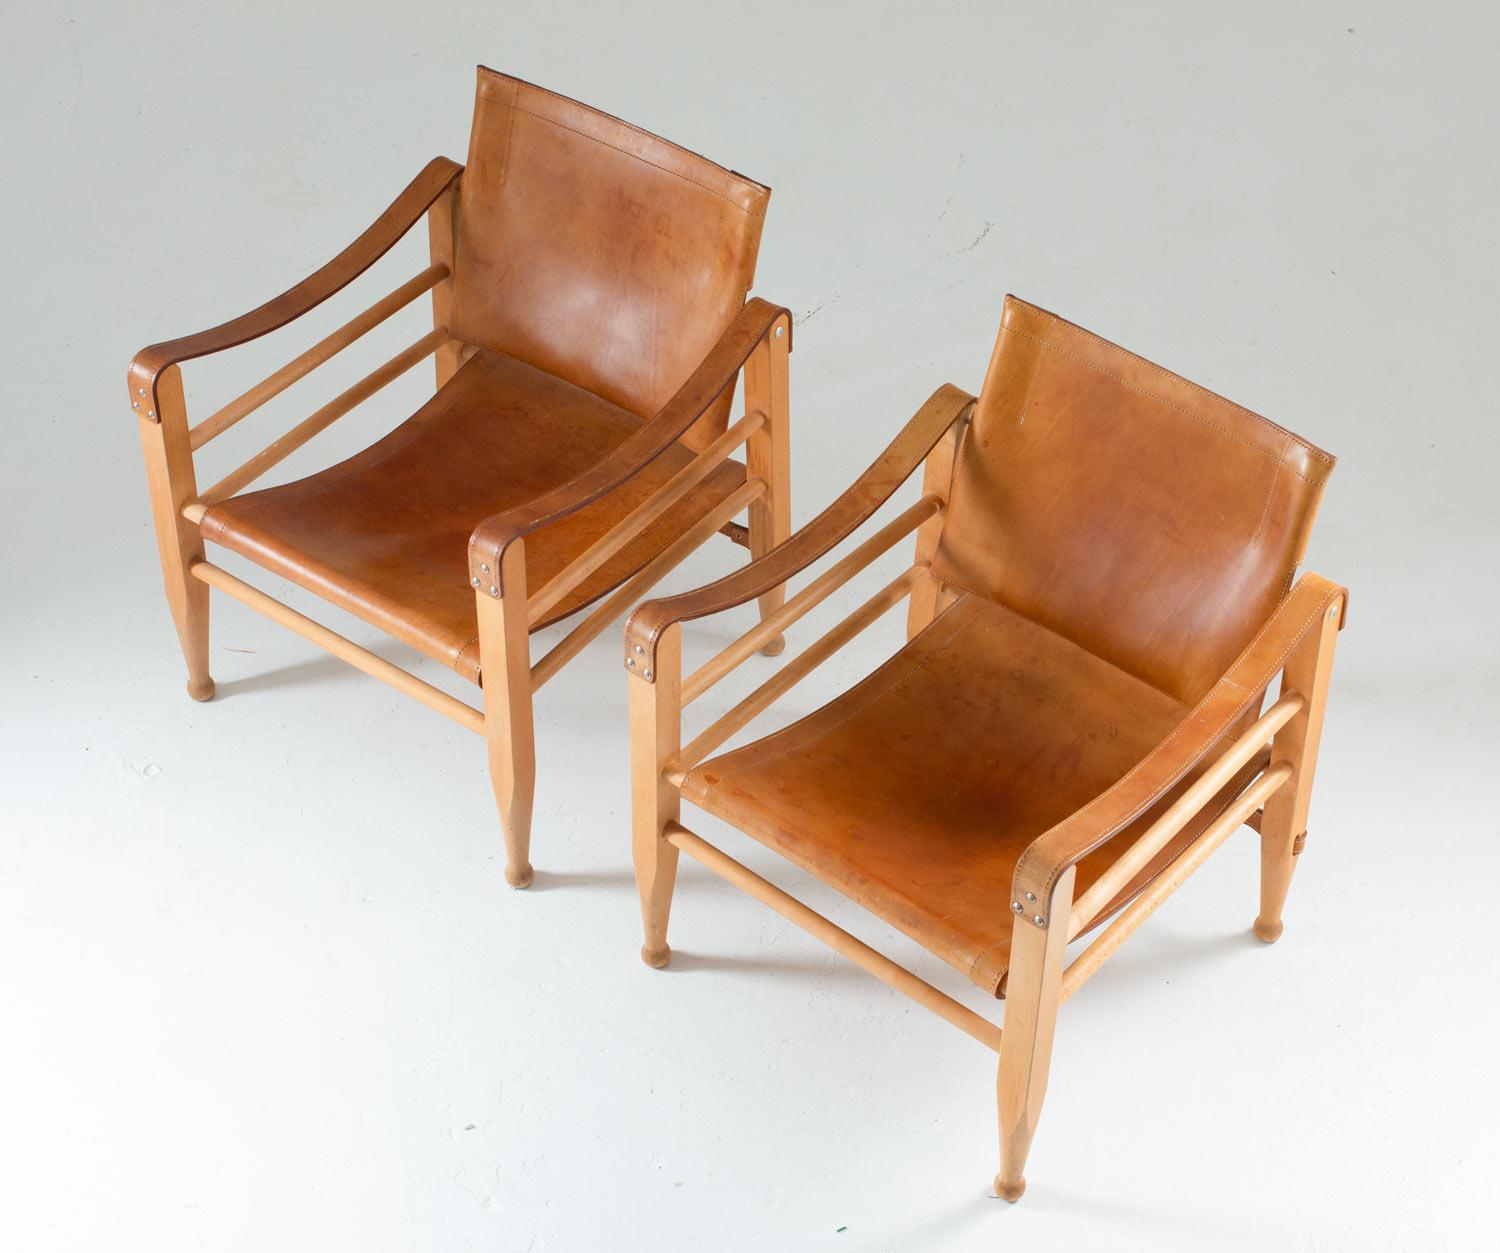 Safari chairs by Aage Bruun & Søn, Denmark.
The chairs are made of beech and natural leather with perfect patina.

Condition: Very good original condition. Stains/patina on the leather and a few missing stitches.
The chairs can be shipped